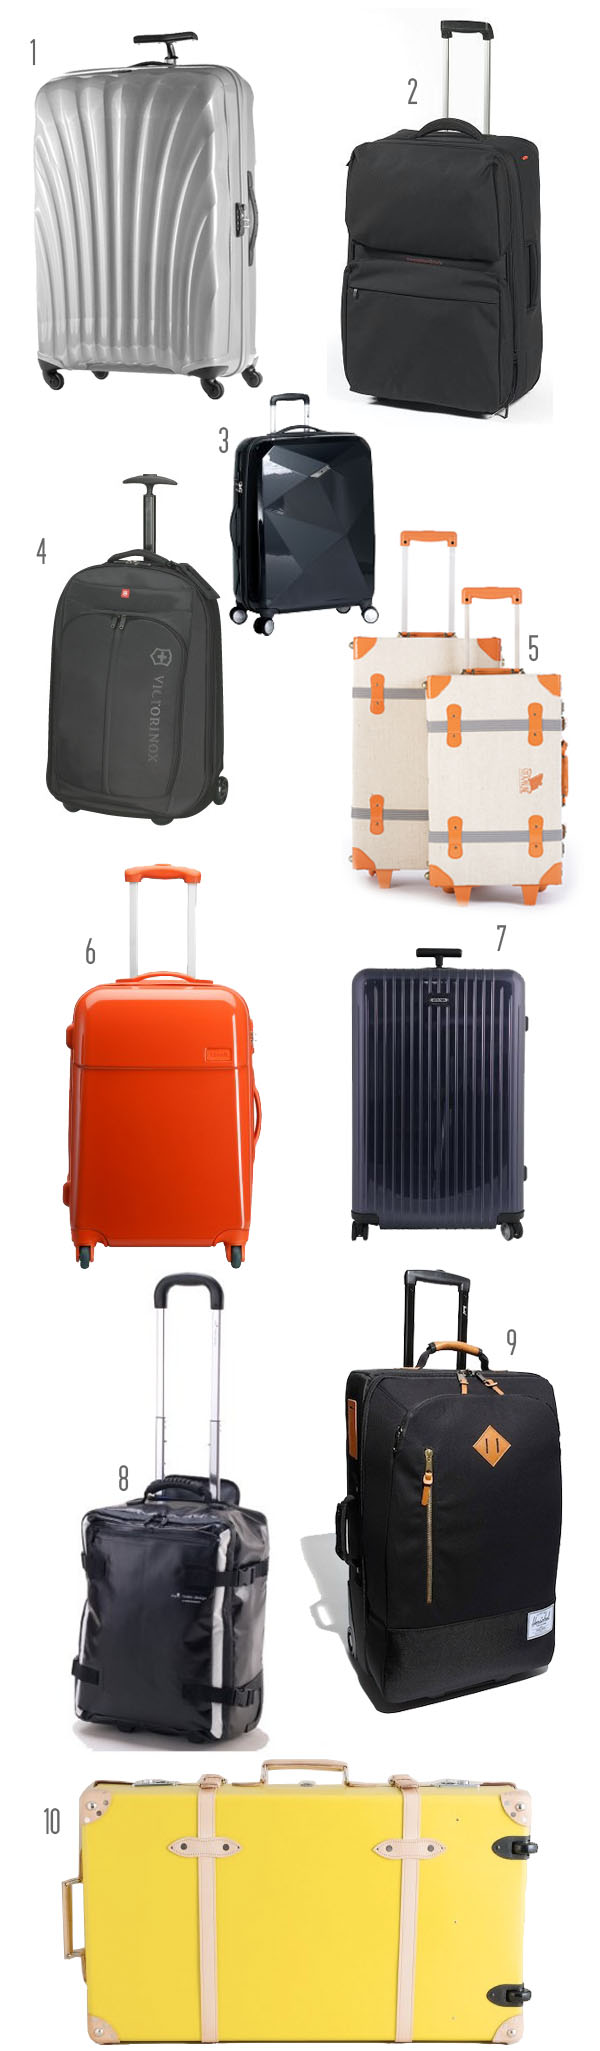 Top 10: Chic luggage for your honeymoon